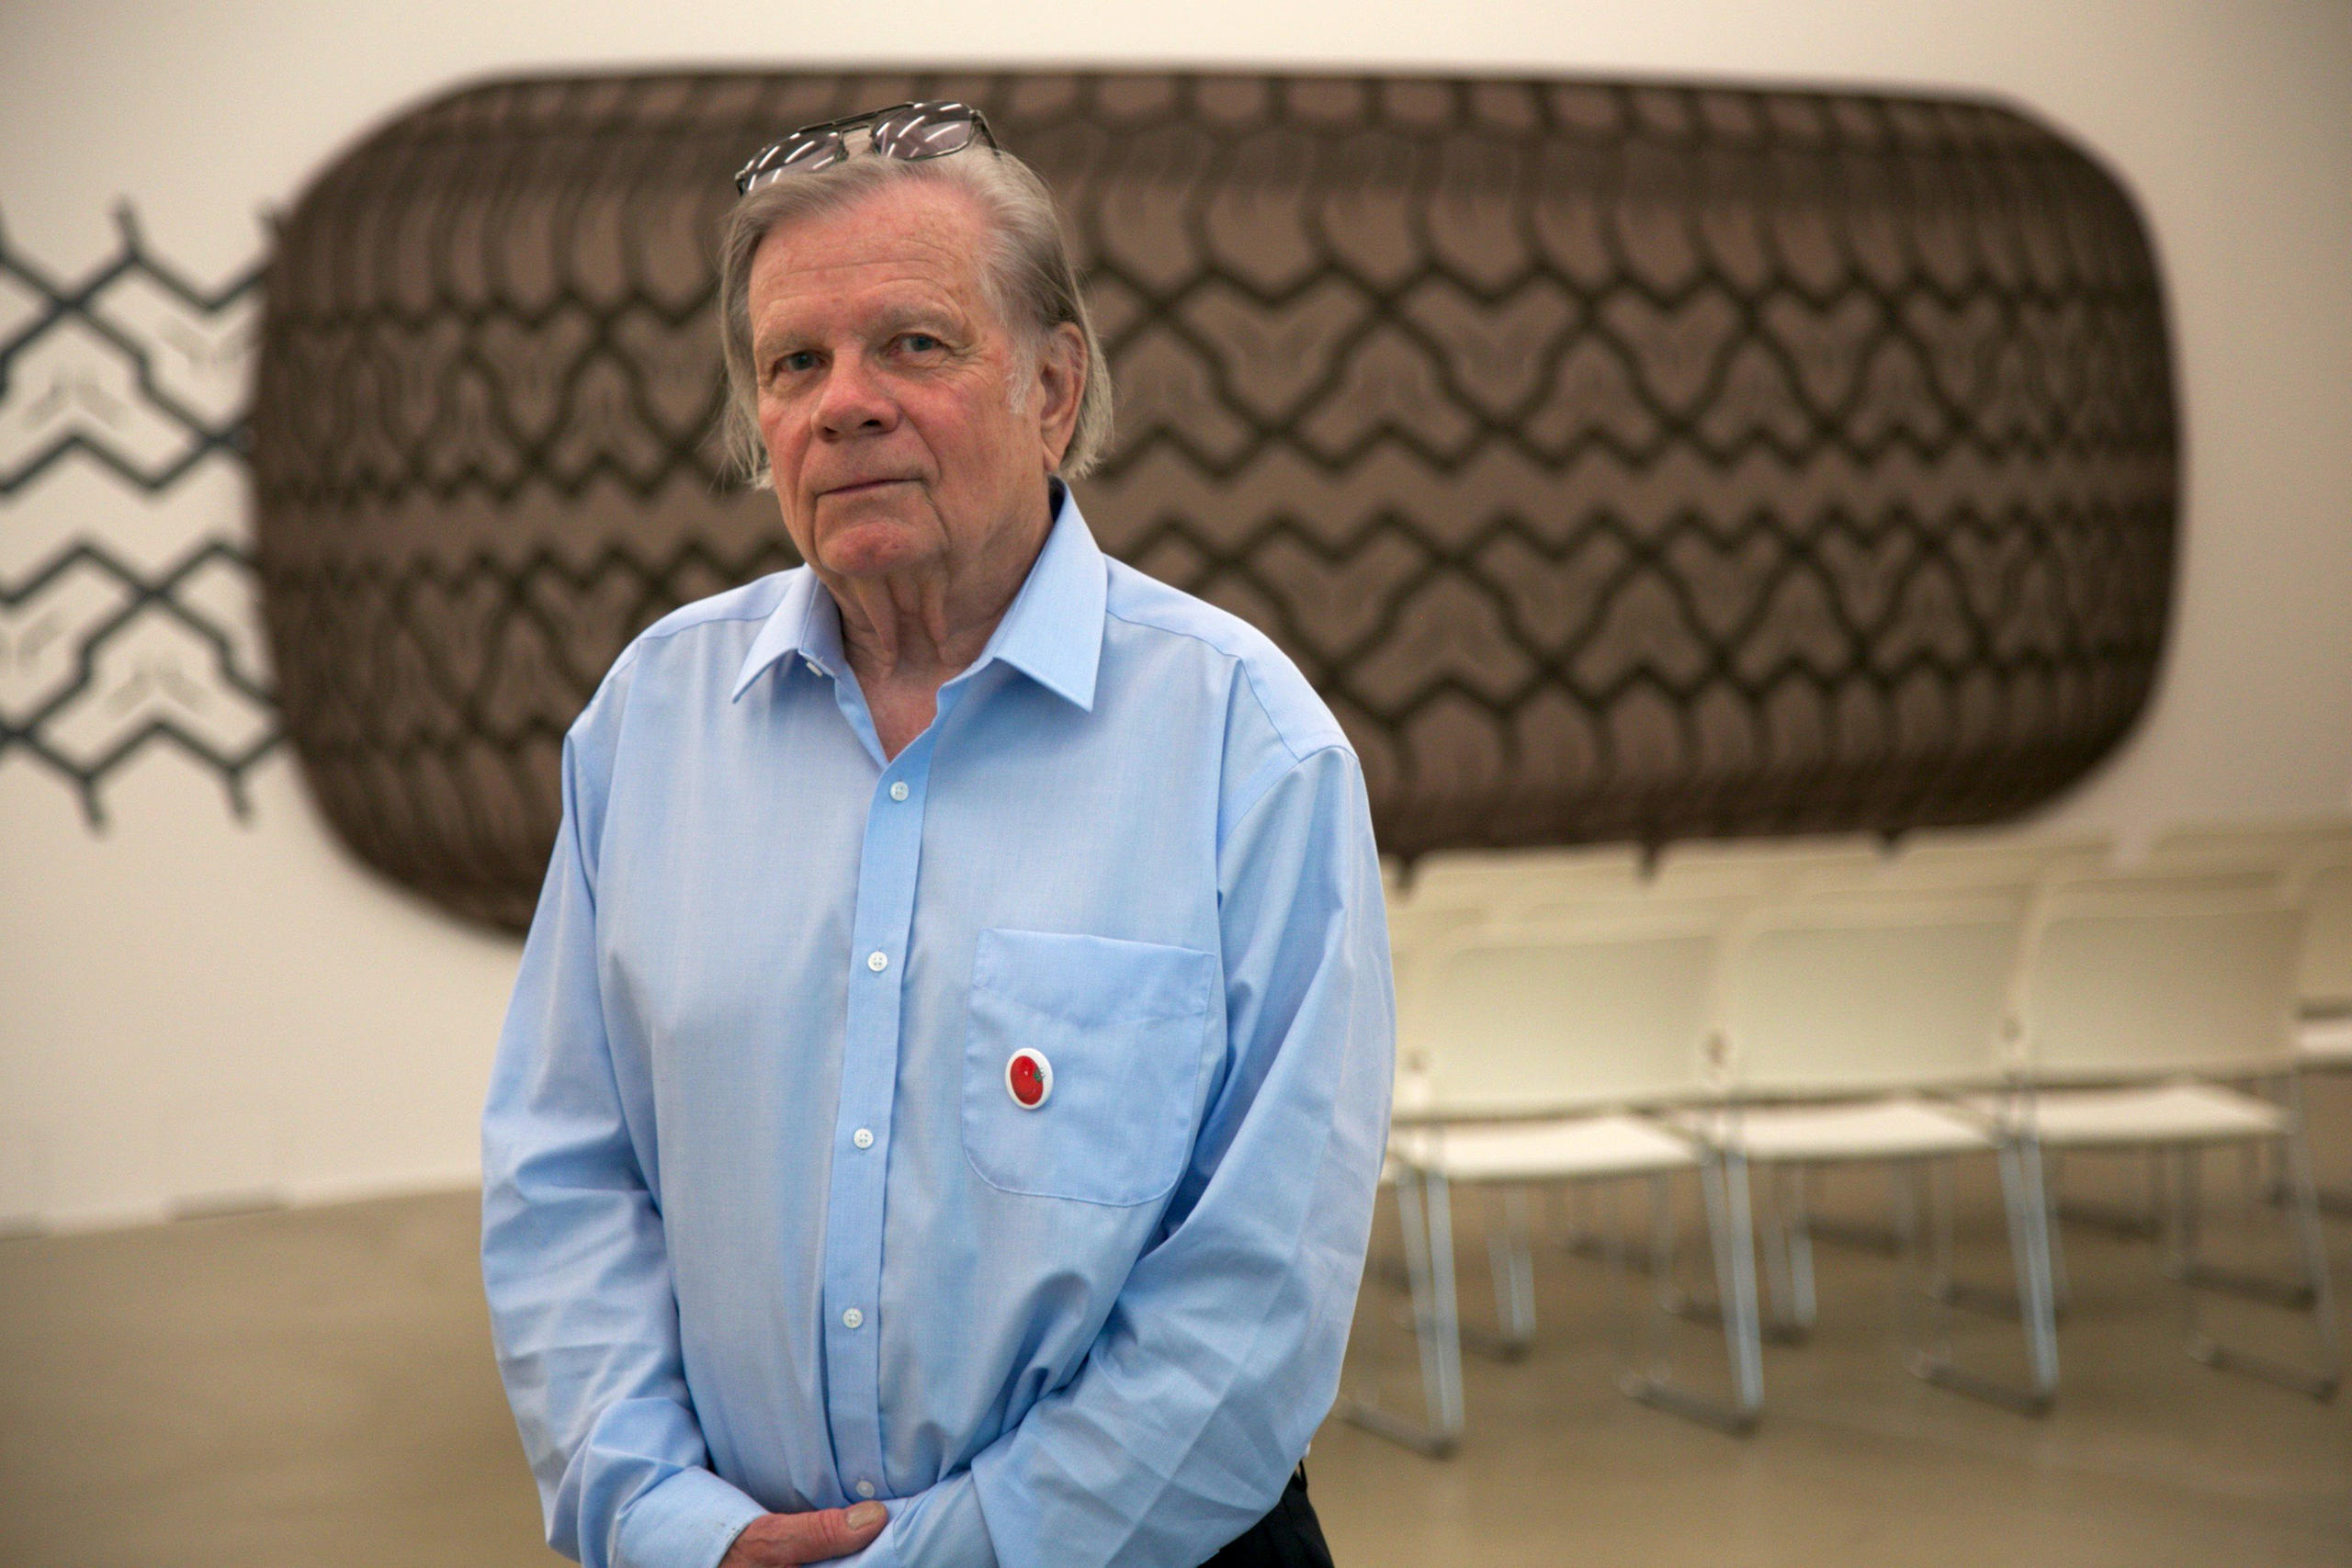 Peter Stämpfli, in front of his work of a giant tyre